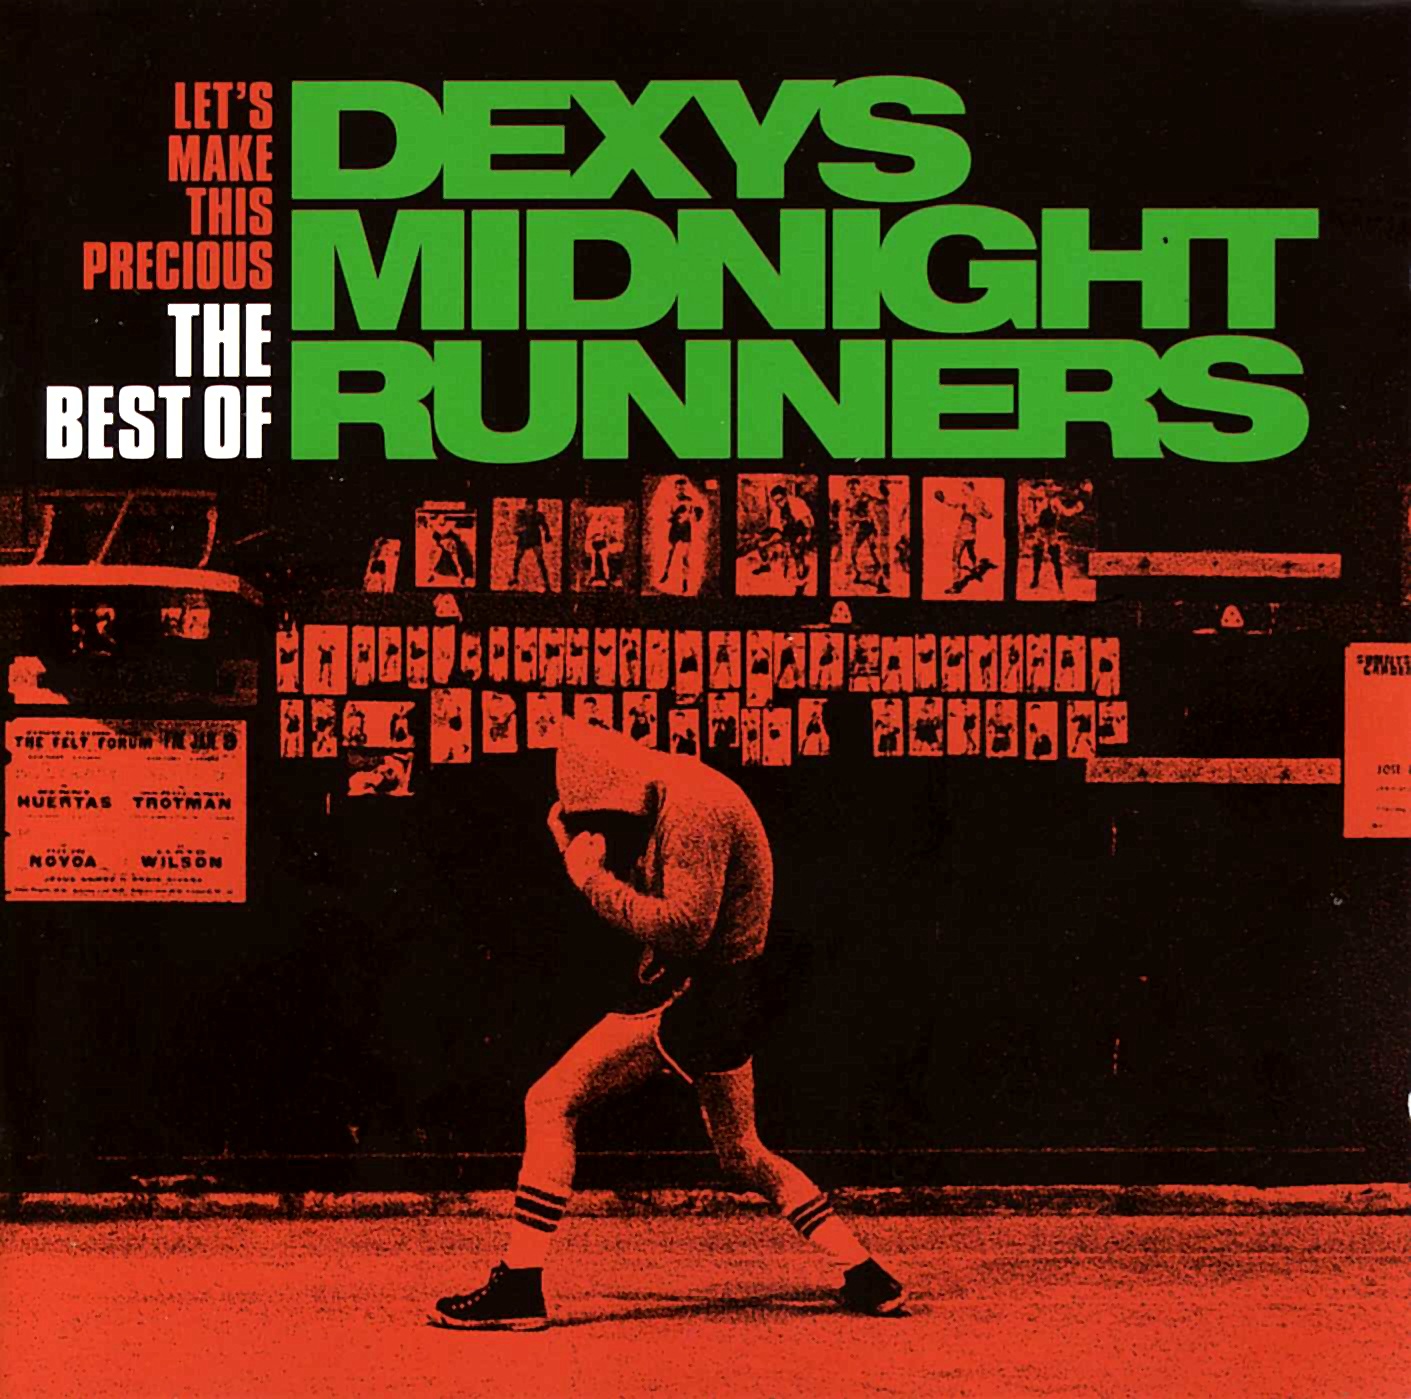 Dexys Midnight Runners - Let's make this precious - The best of(Reissue)